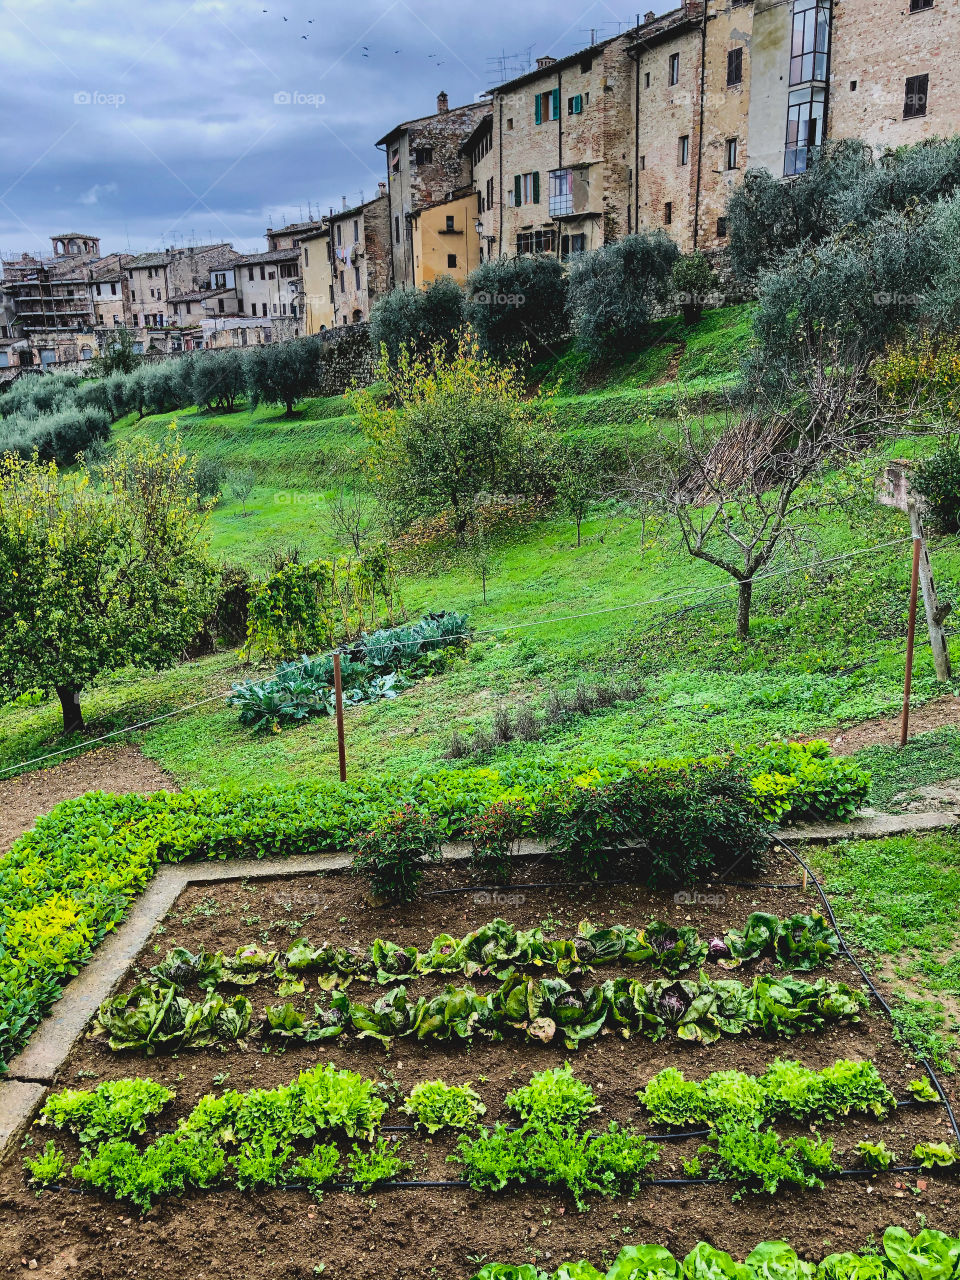 Vegetables Garden in Tuscany Italy 